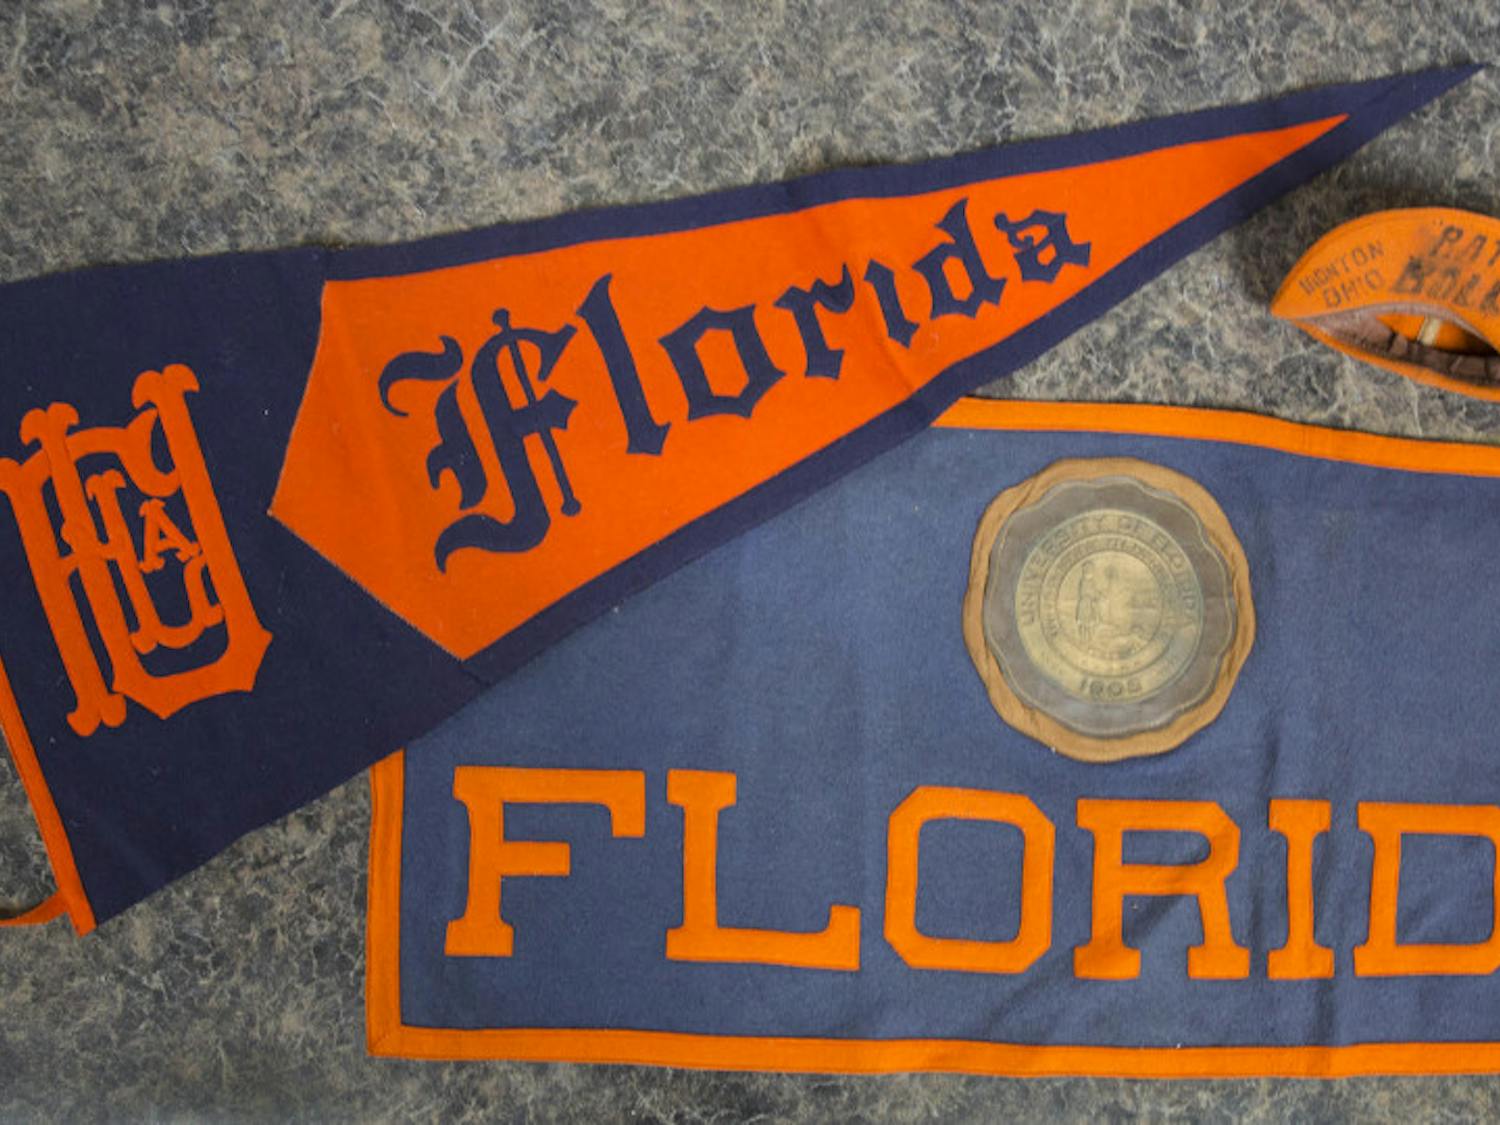 The University Archives at the George A. Smathers Libraries received a triangular pennant, a rectangular banner and a “rat cap” from the 1930s as a donation. They are among the oldest items in the university’s collection. 